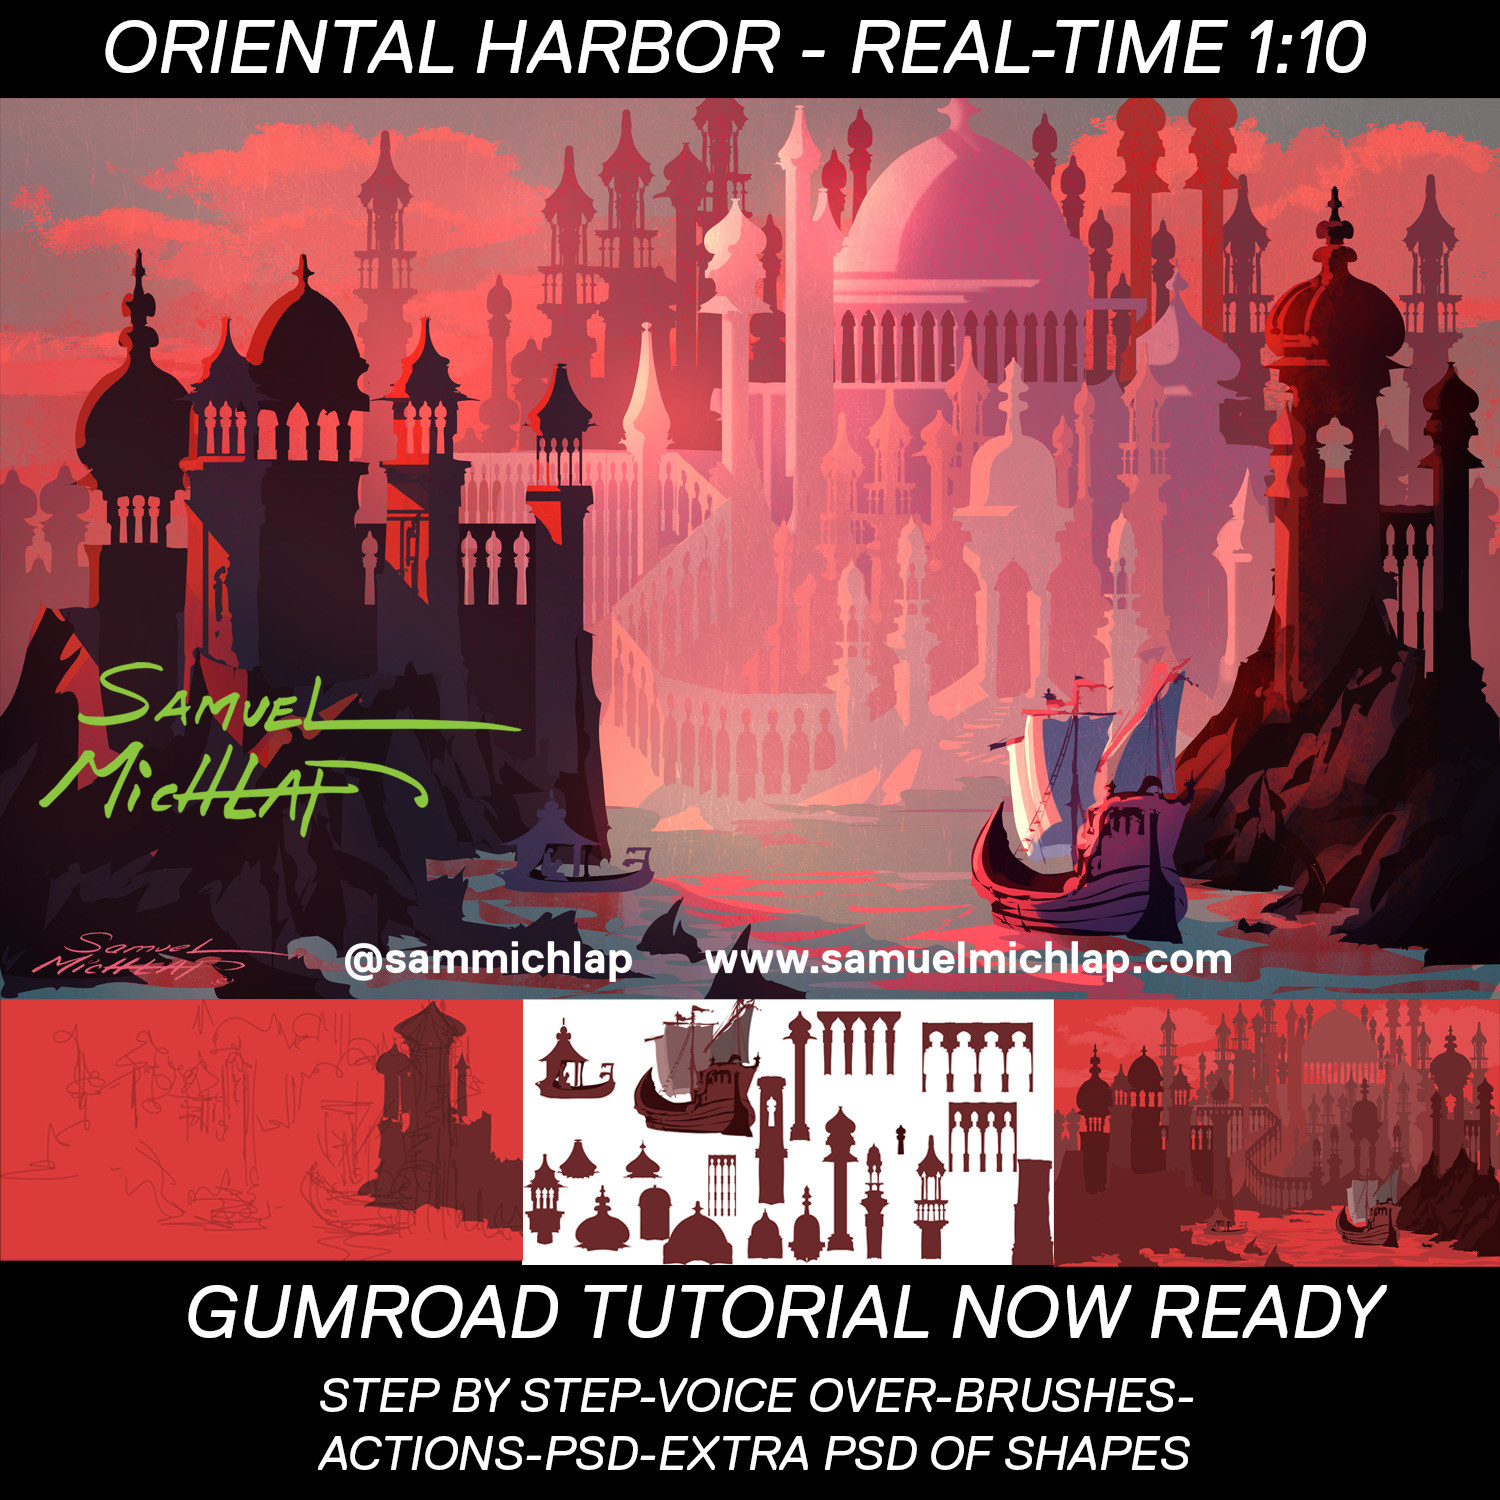 https://gum.co/aHgbgu Hey Everyone, Here is the direct link to the Gumroad tutorial.